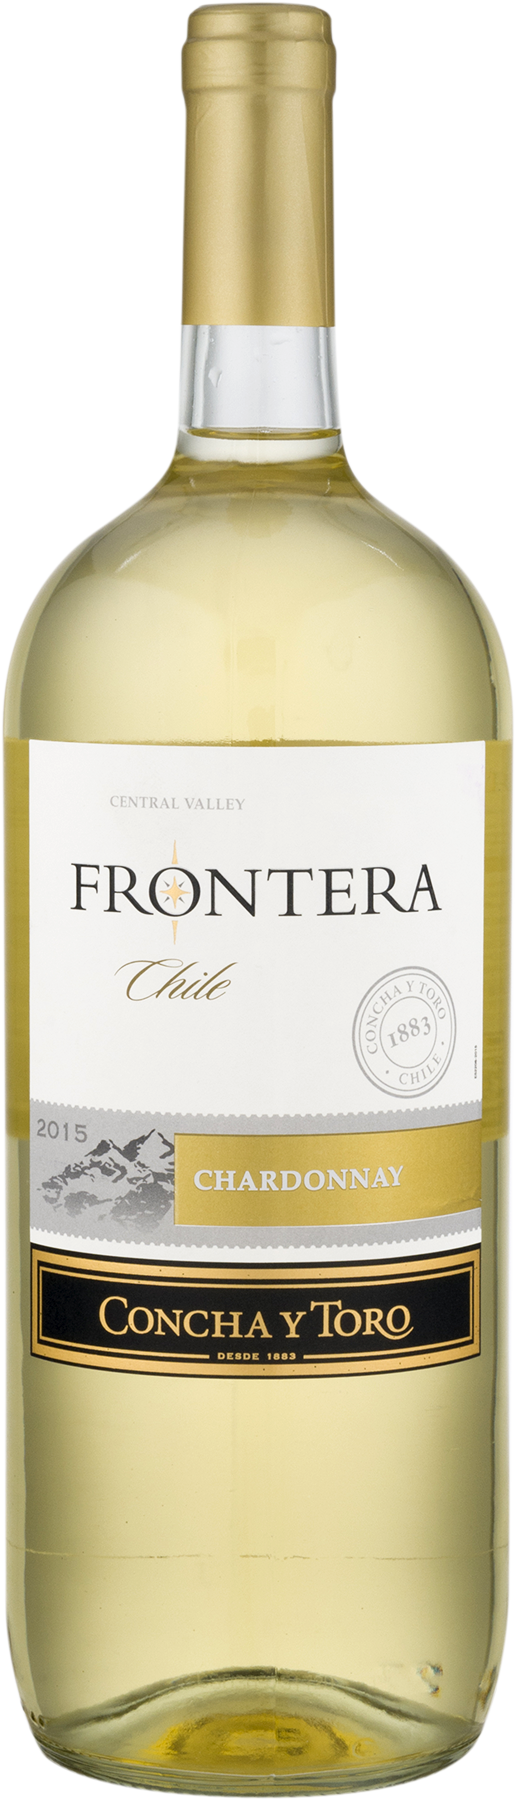 Concha Y Toro Frontera Chardonnay 1.5L Type: White Categories: 1.5L, Chardonnay, Chile, quantity high enough for online, region_Chile, size_1.5L, subtype_Chardonnay. Buy today at Wine and Liquor Mart Poughkeepsie